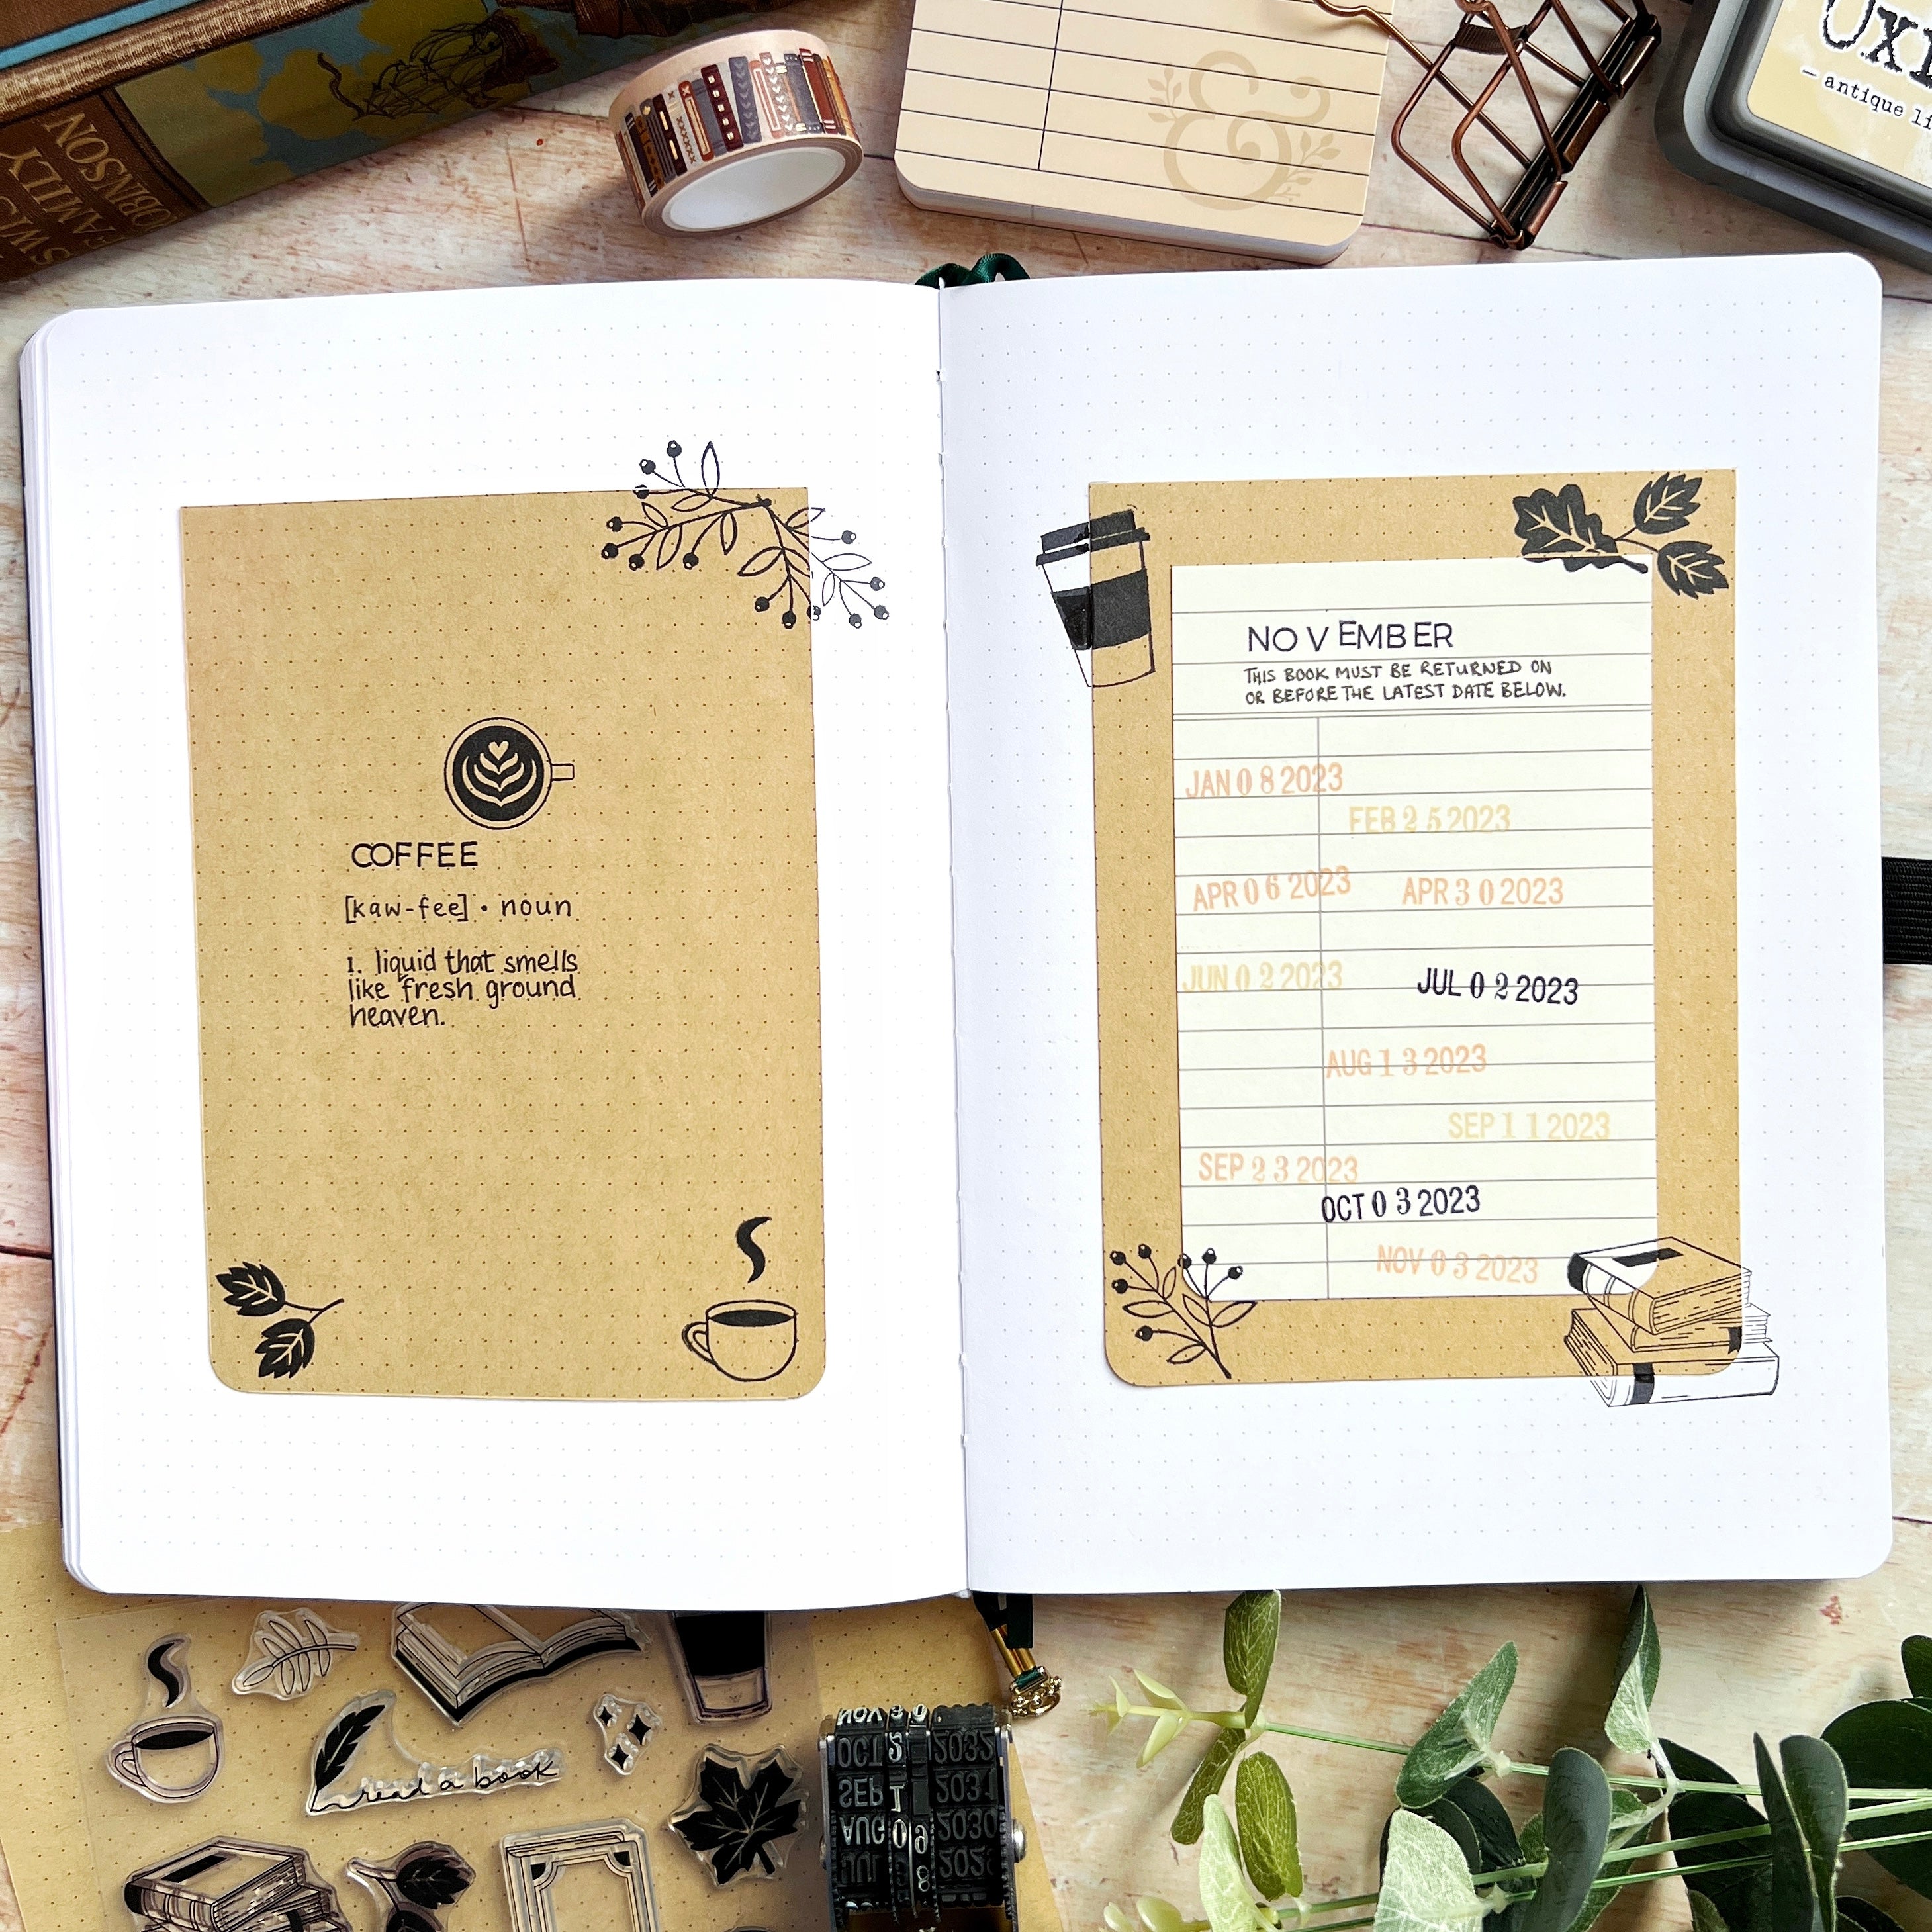 Open journal with November cover page using Kraft paper and ink stamps of books and coffee